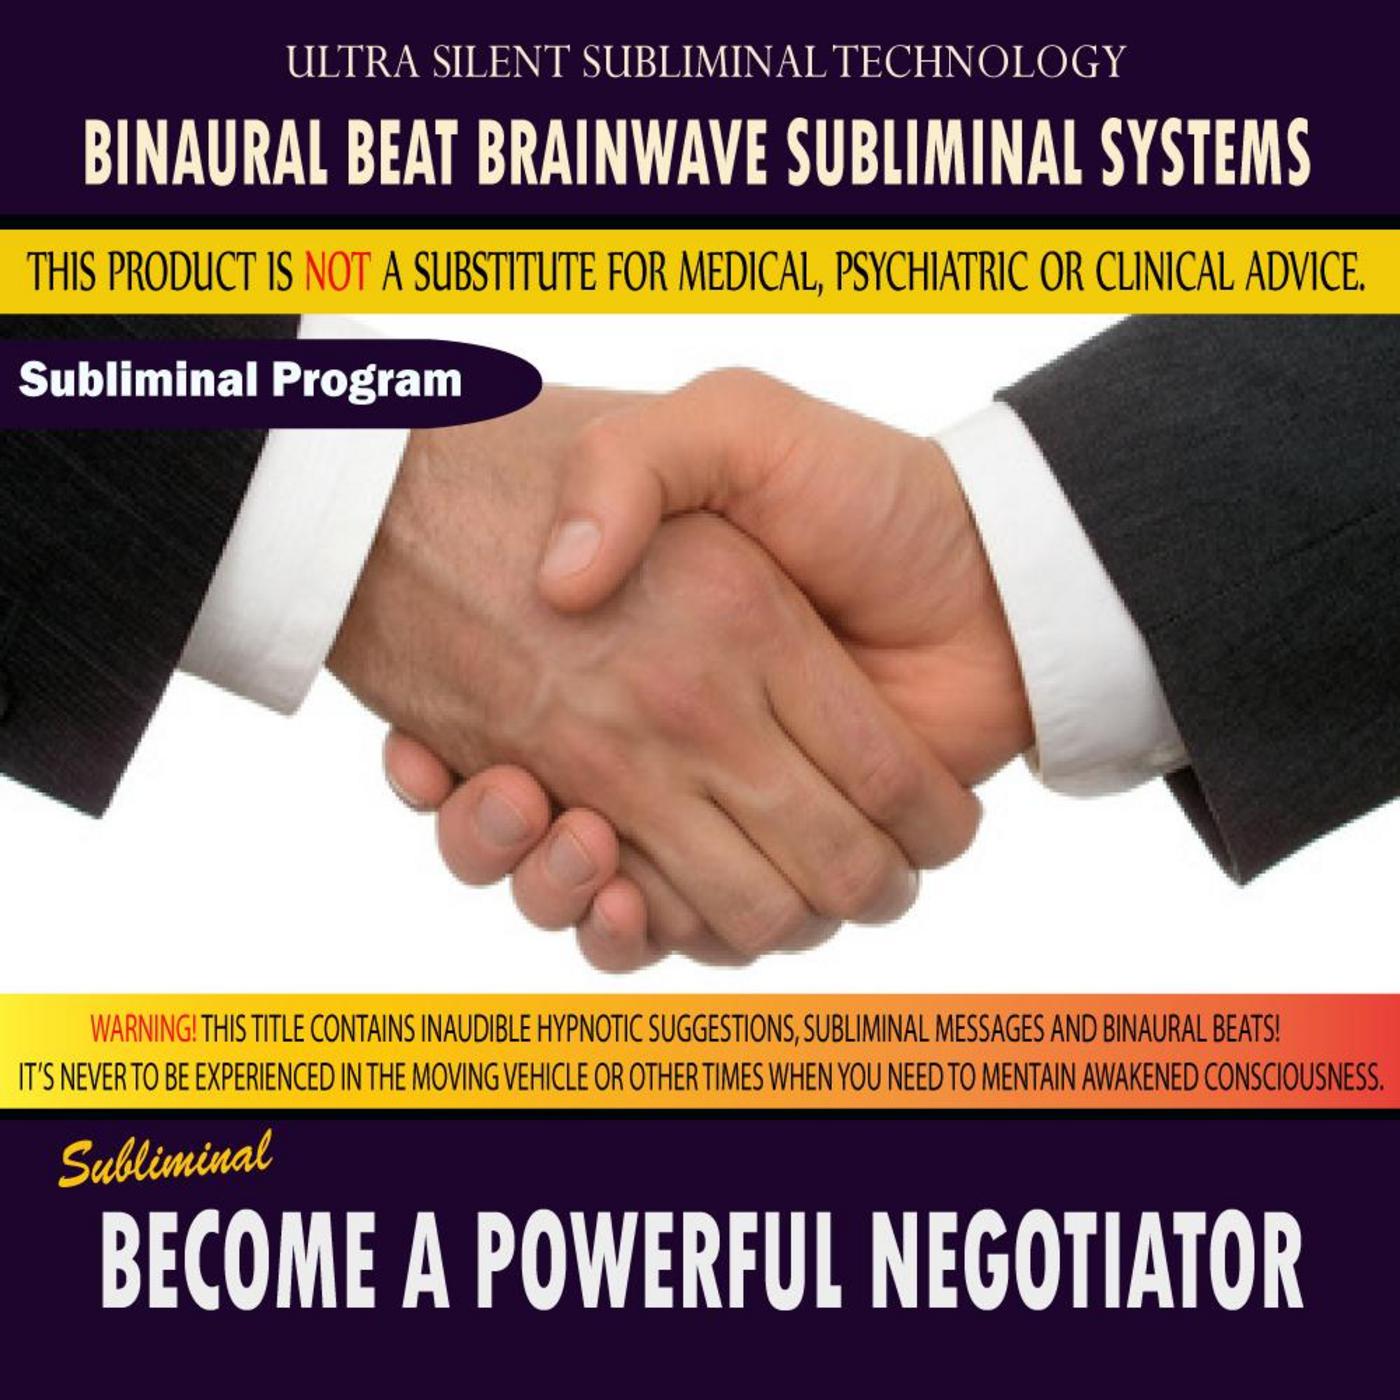 Become a Powerful Negotiator